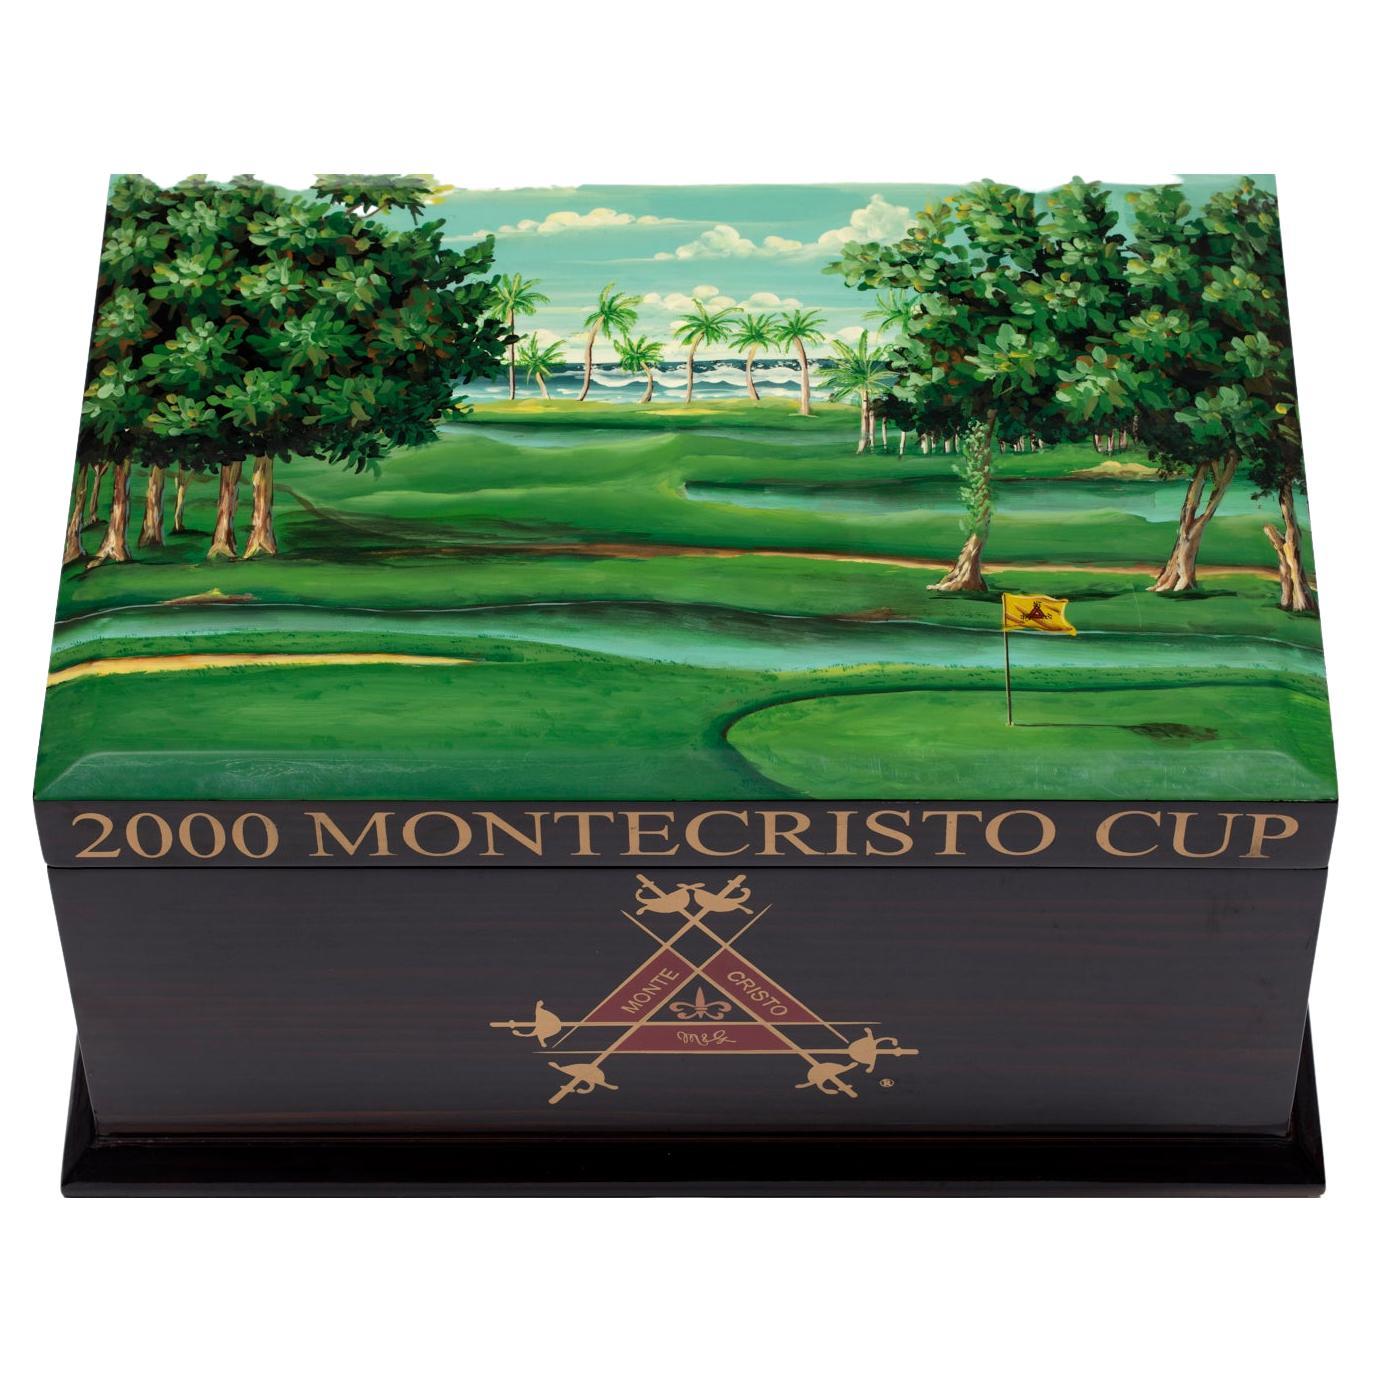 Montecristo Cup 2000 Humidor Limited Edition For Sale